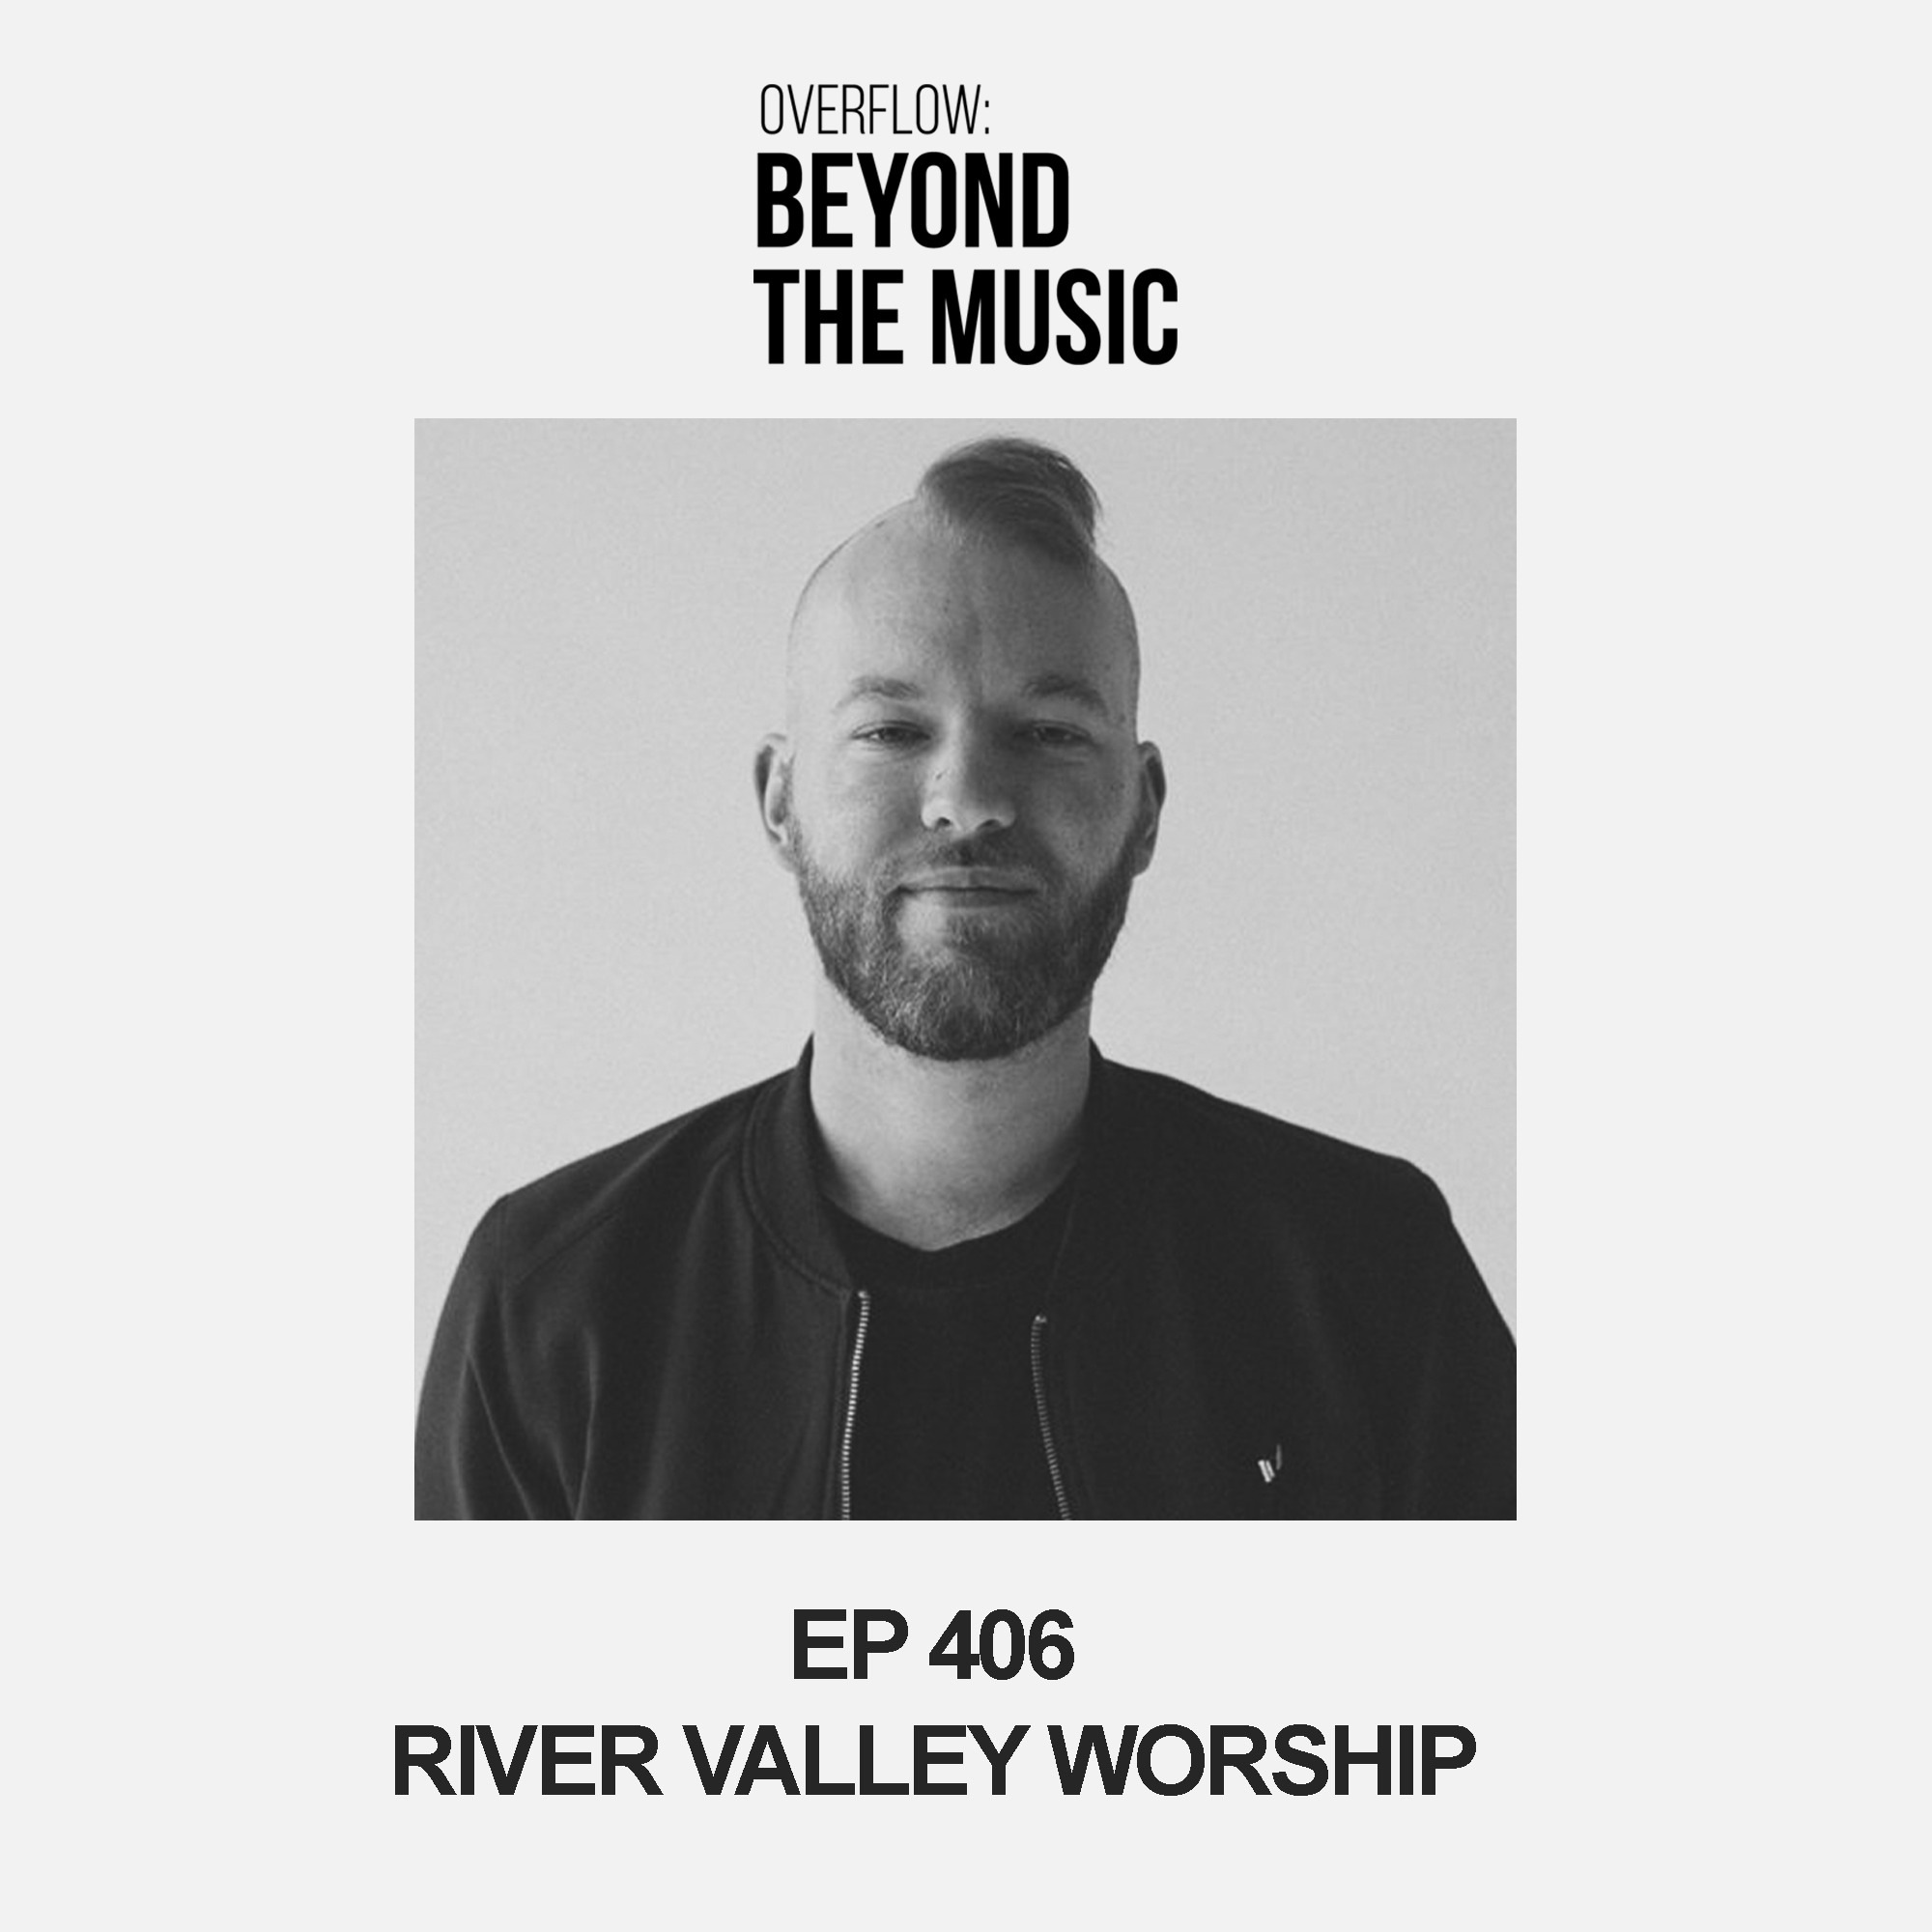 River Valley Worship